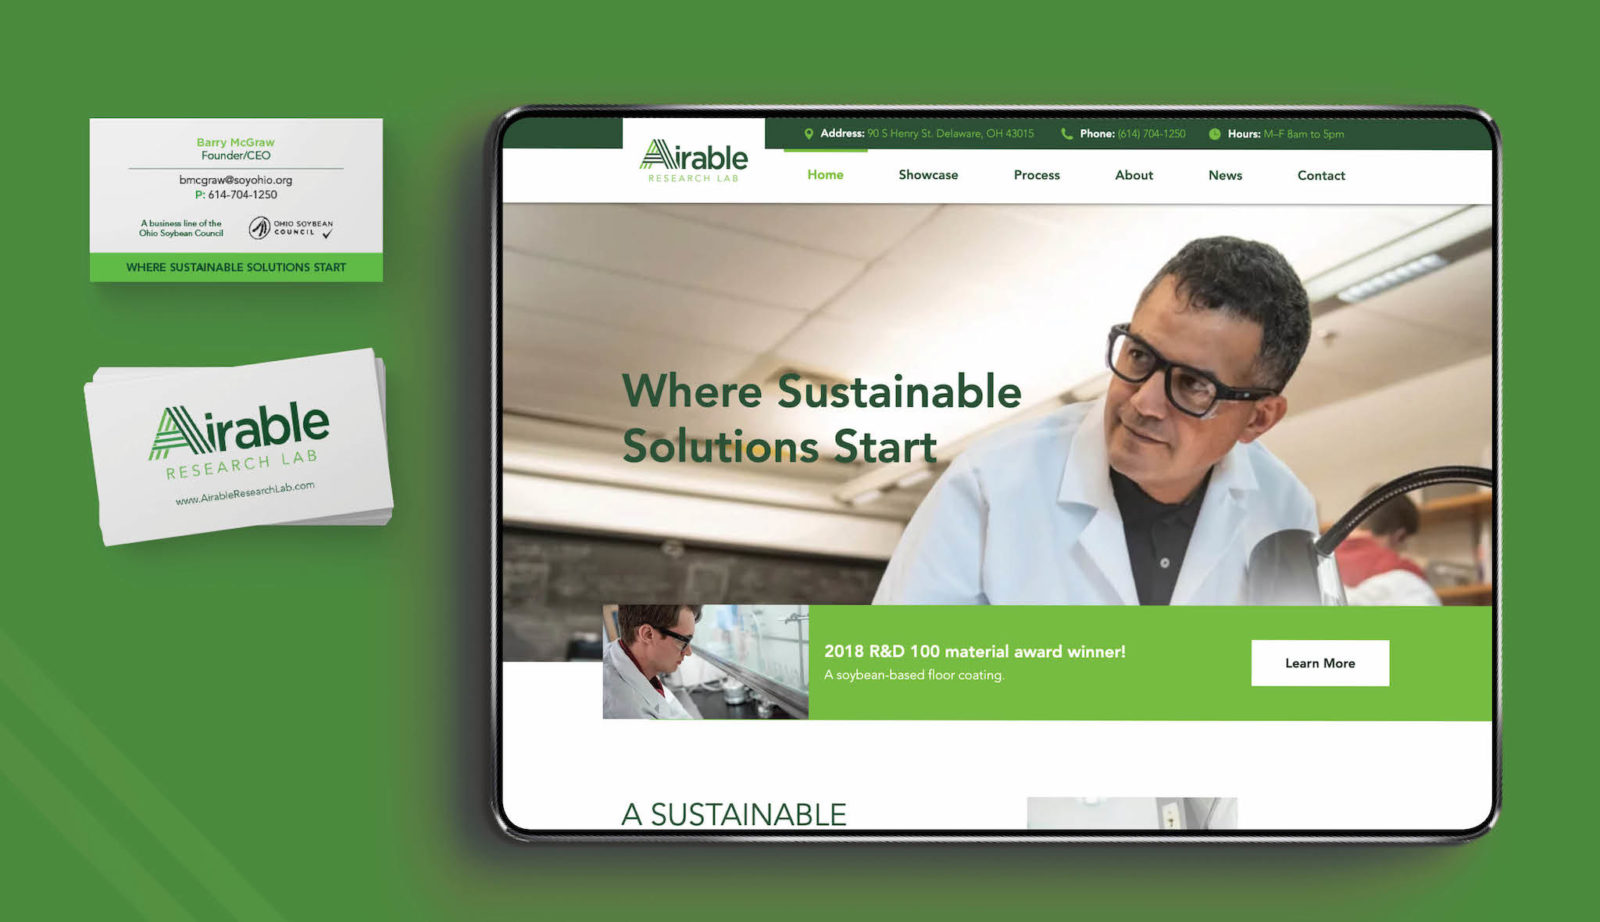 Airable Research Lab business cards and website